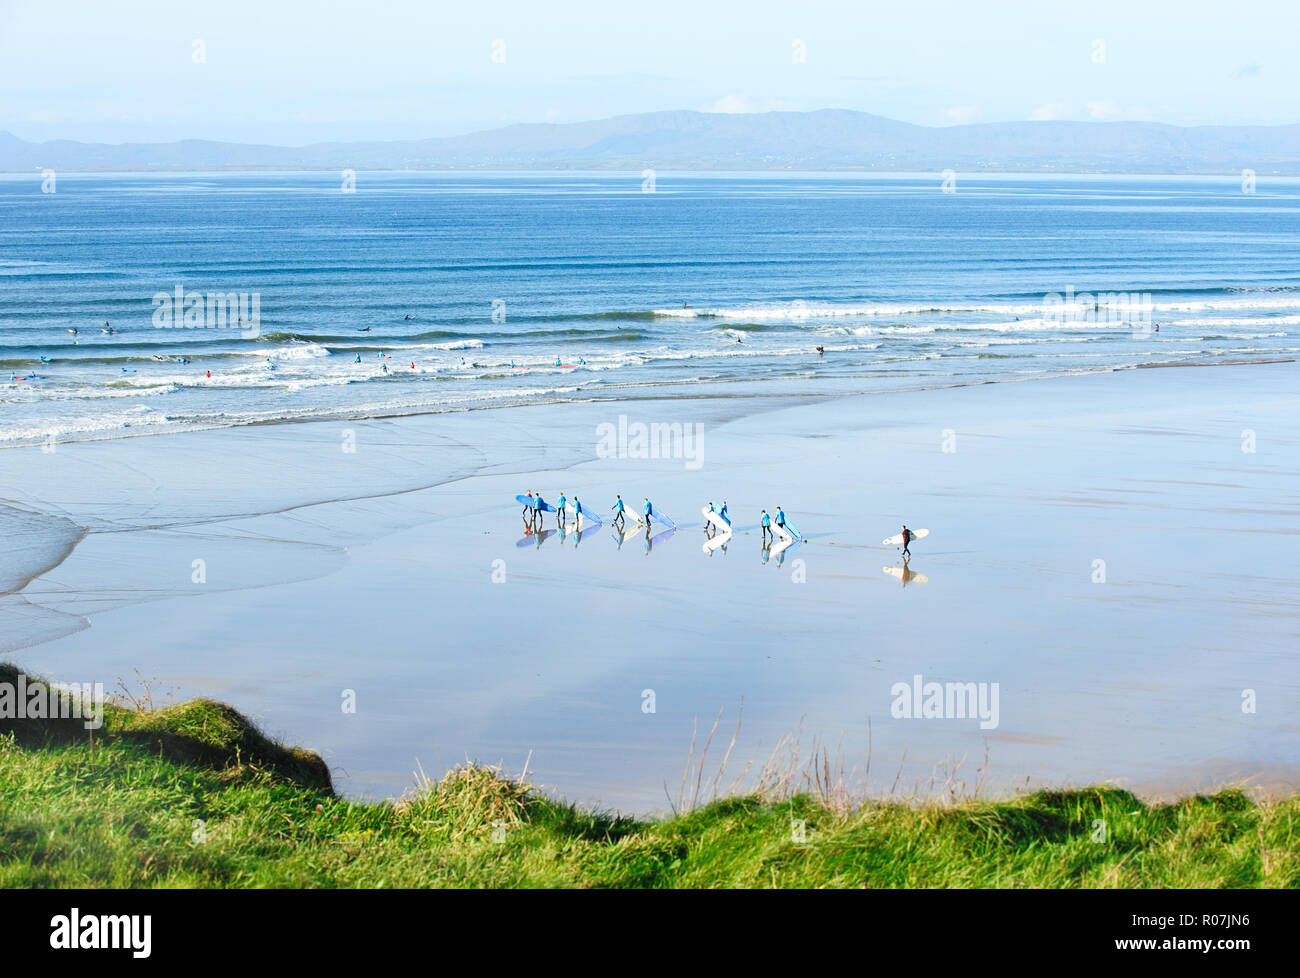 Magnificent sandy beach,Tullan Strand, which attracts surfers from all over Ireland and Europe Stock Photo